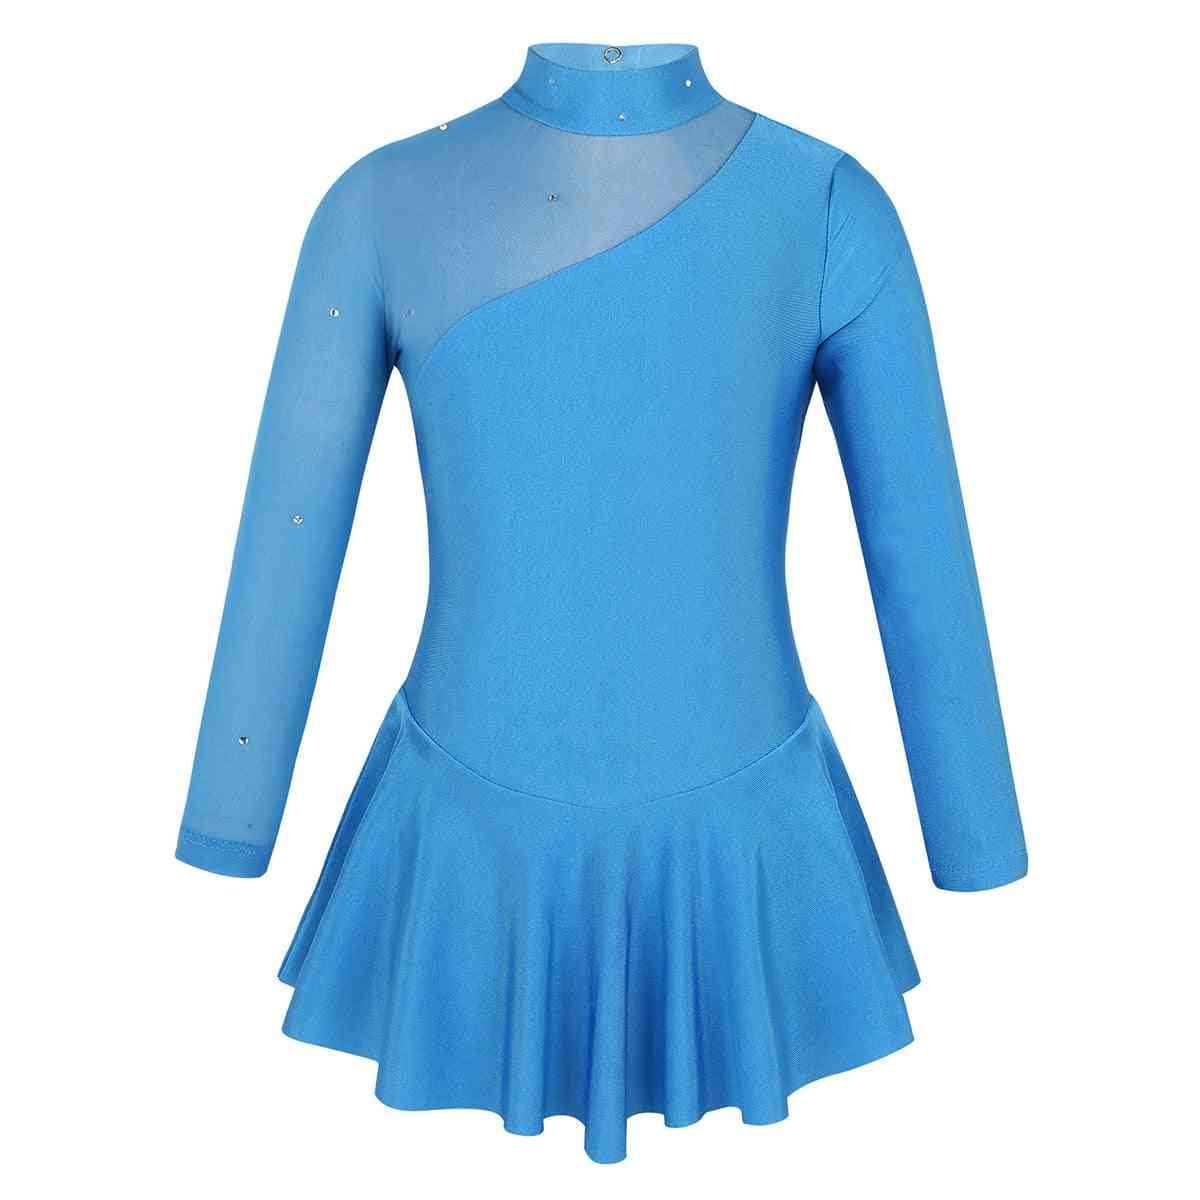 Girls Figure Ice Skating Competition Dress, Long Sleeves Tulle Splice Cutouts